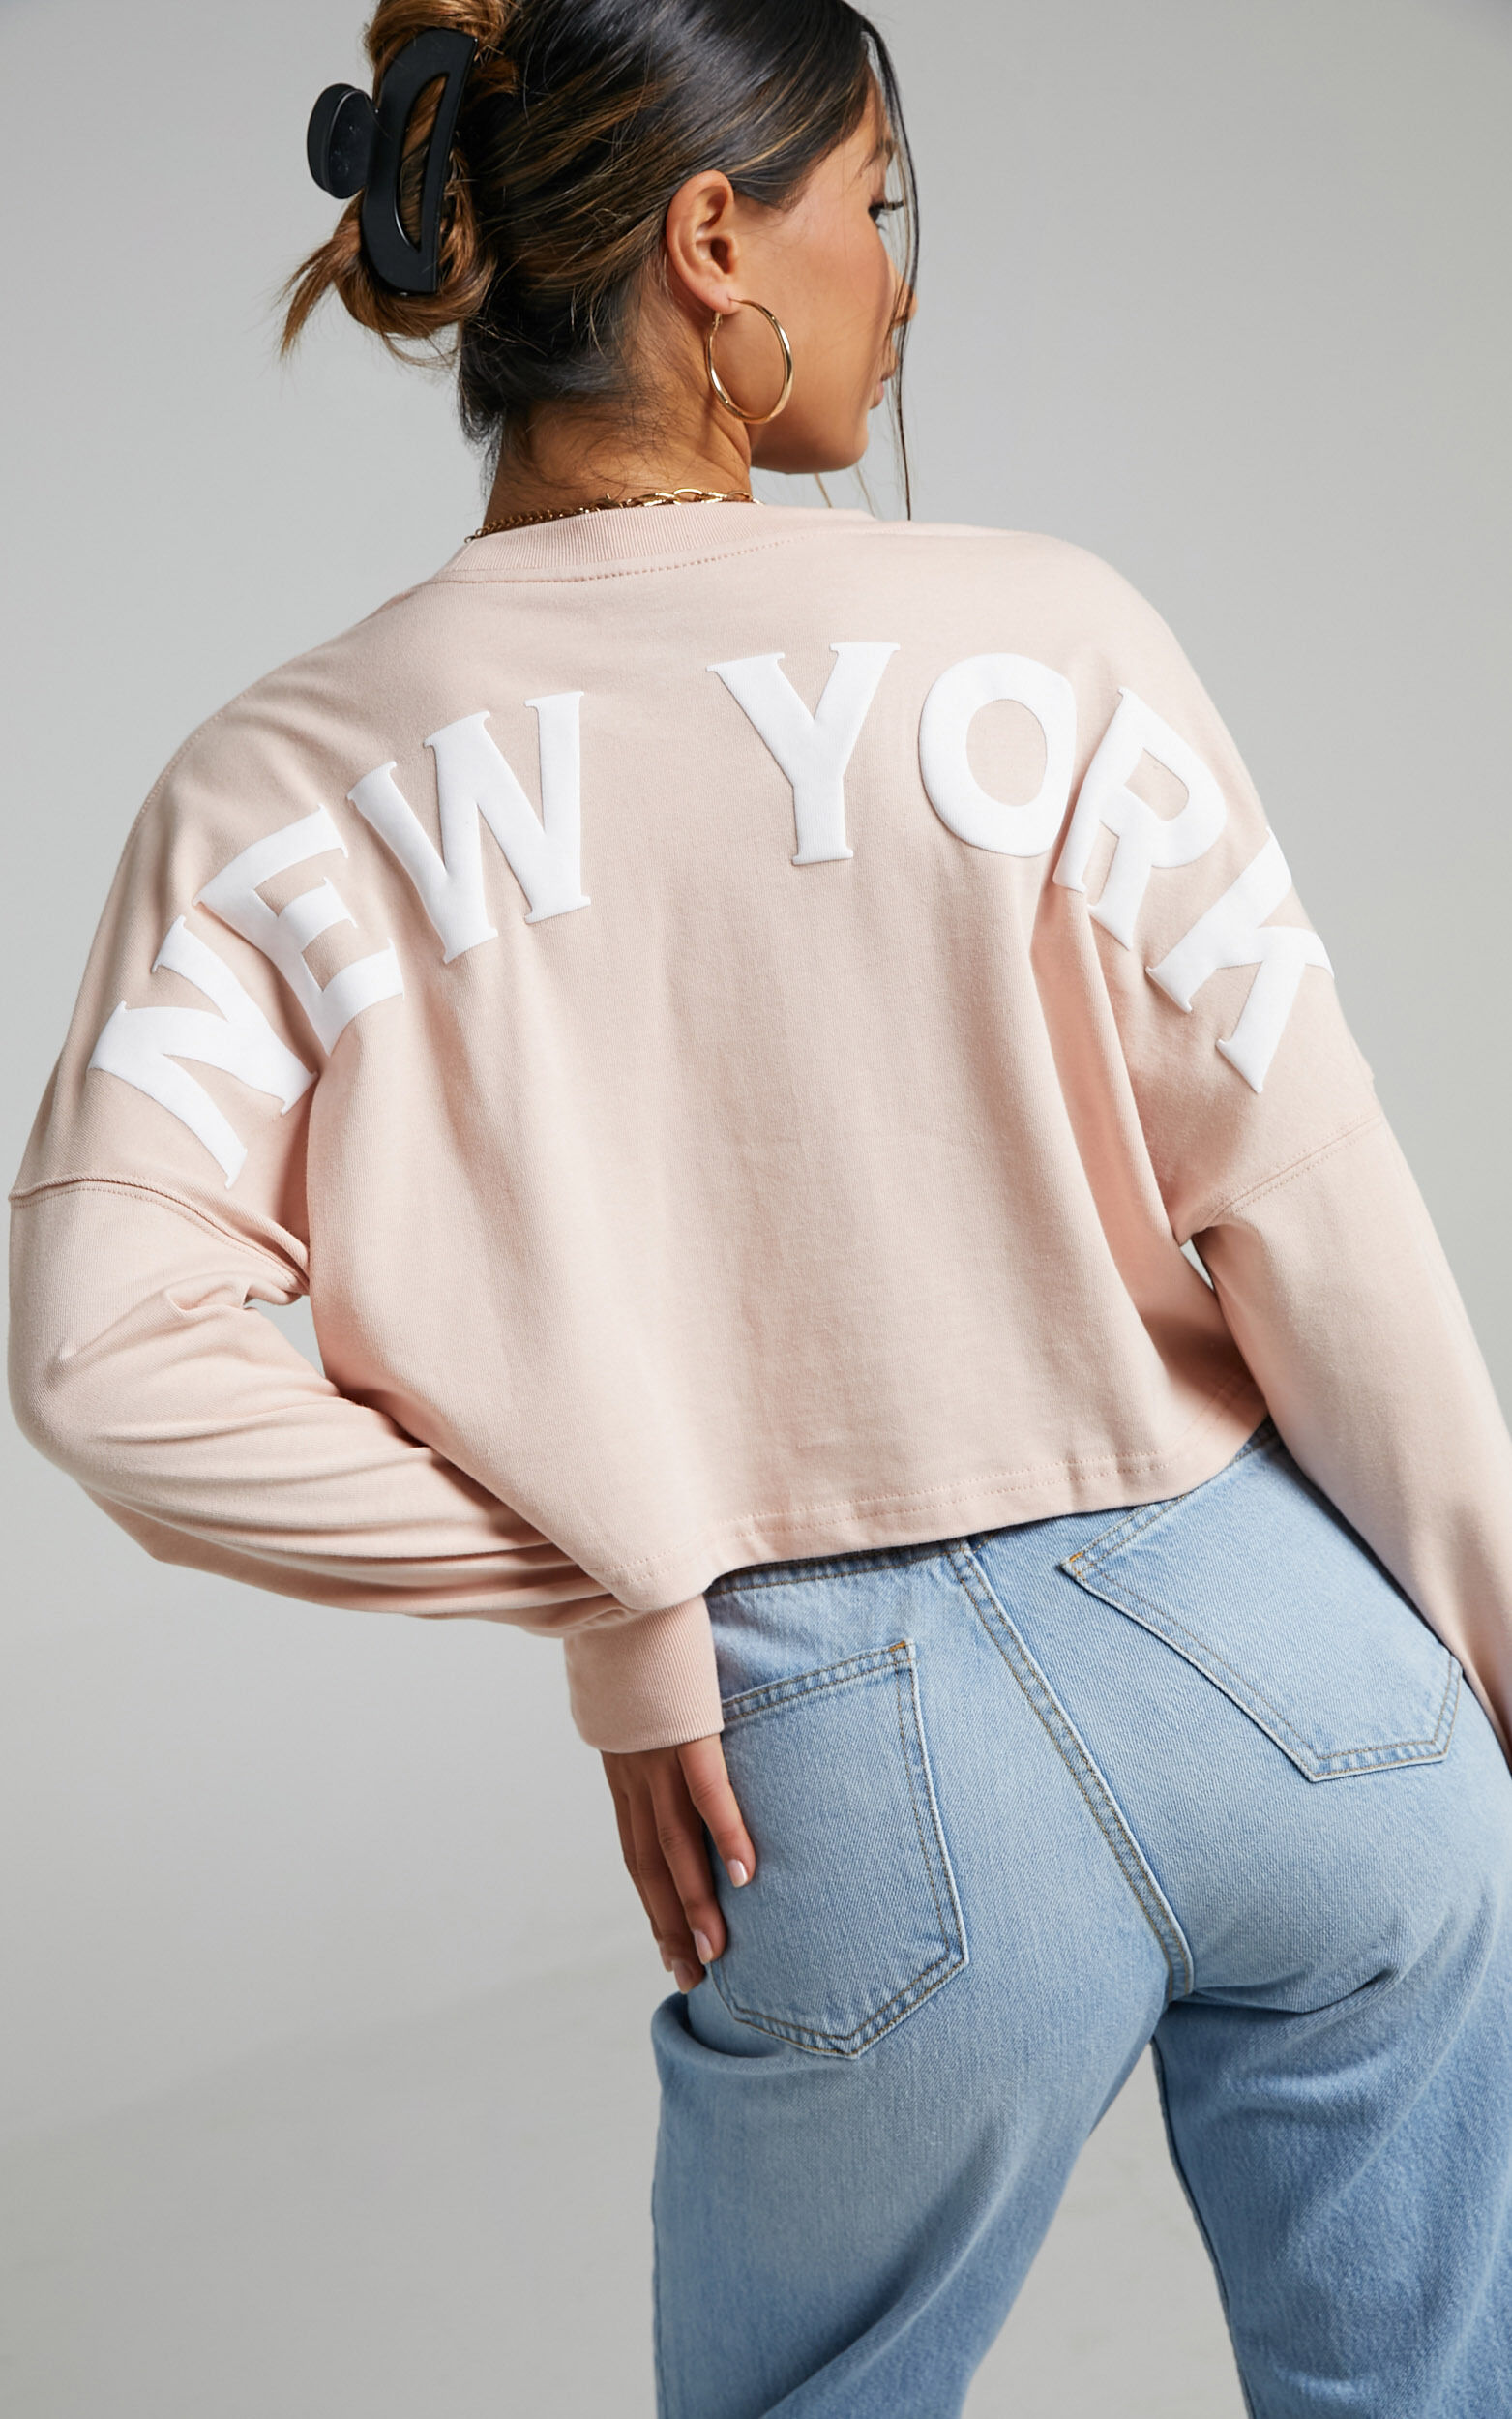 Majestic - NY Yankees Cropped Rando LS Tee in Peach - L, ORG1, super-hi-res image number null